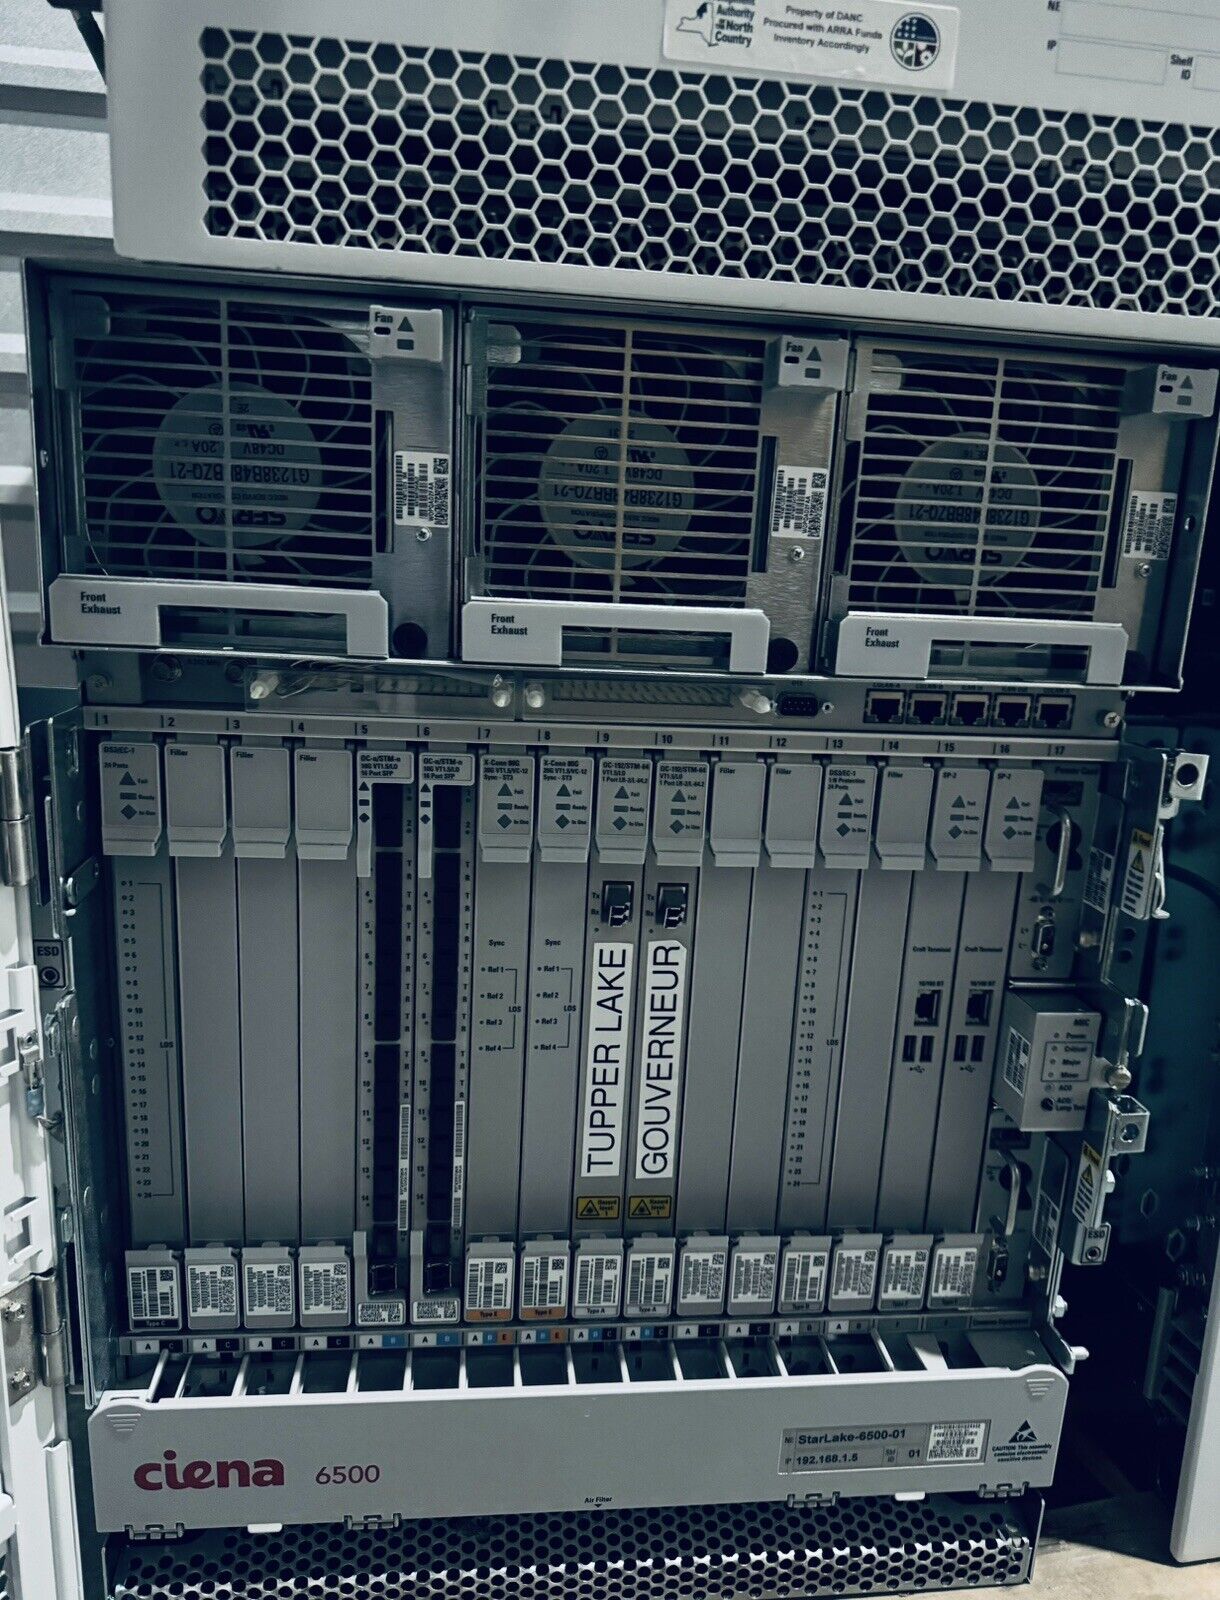 Ciena 6500 17-Slot Chassis OC-192 SP-2 DS3 OC-N - LOADED WITH CARDS